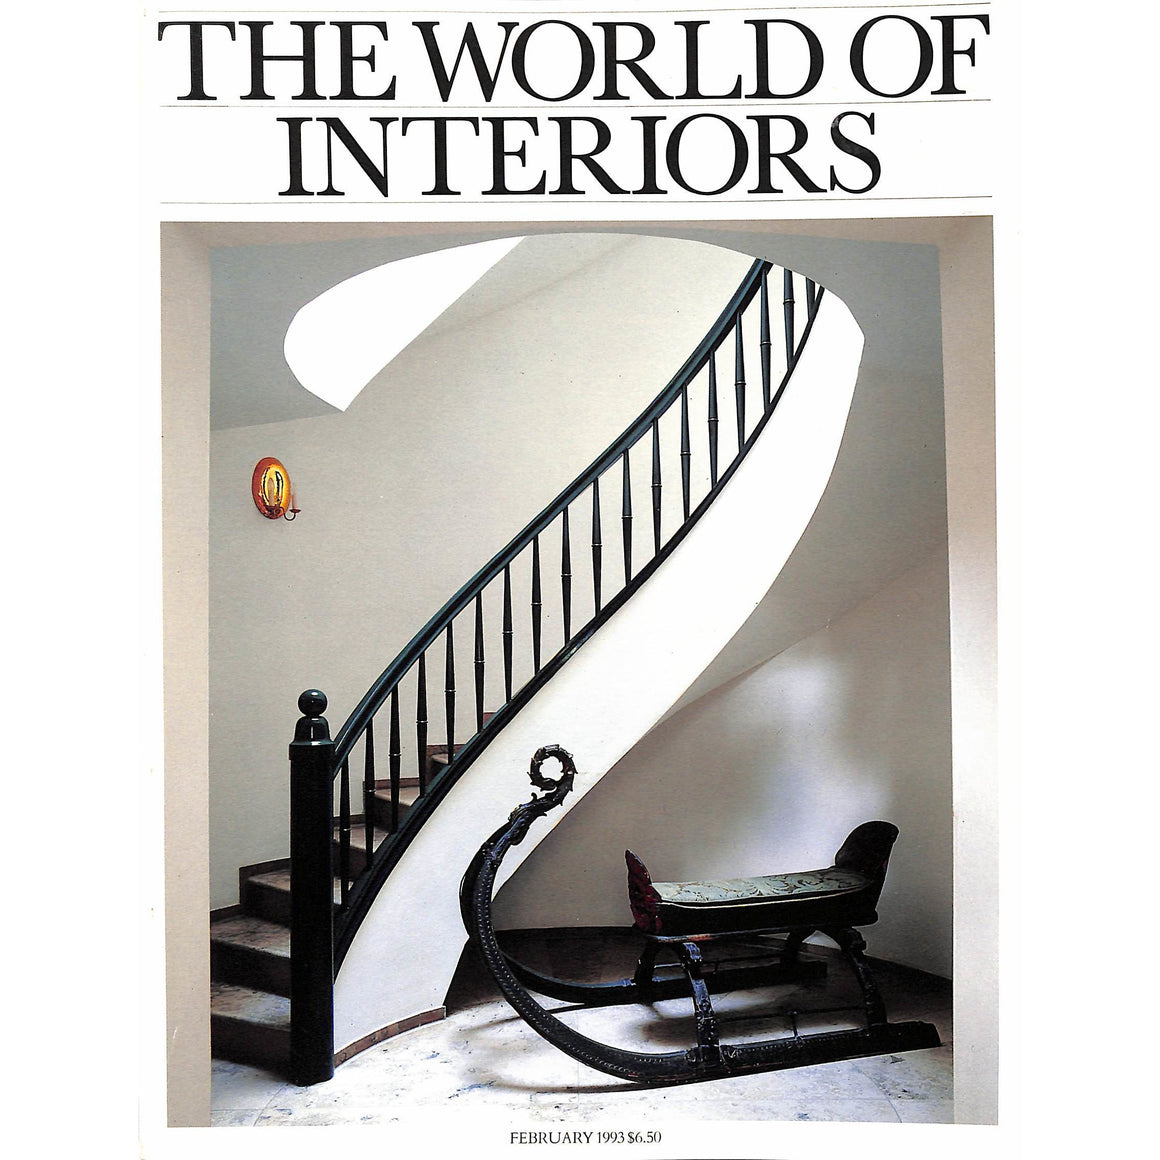 The World of Interiors February 1993 (SOLD)